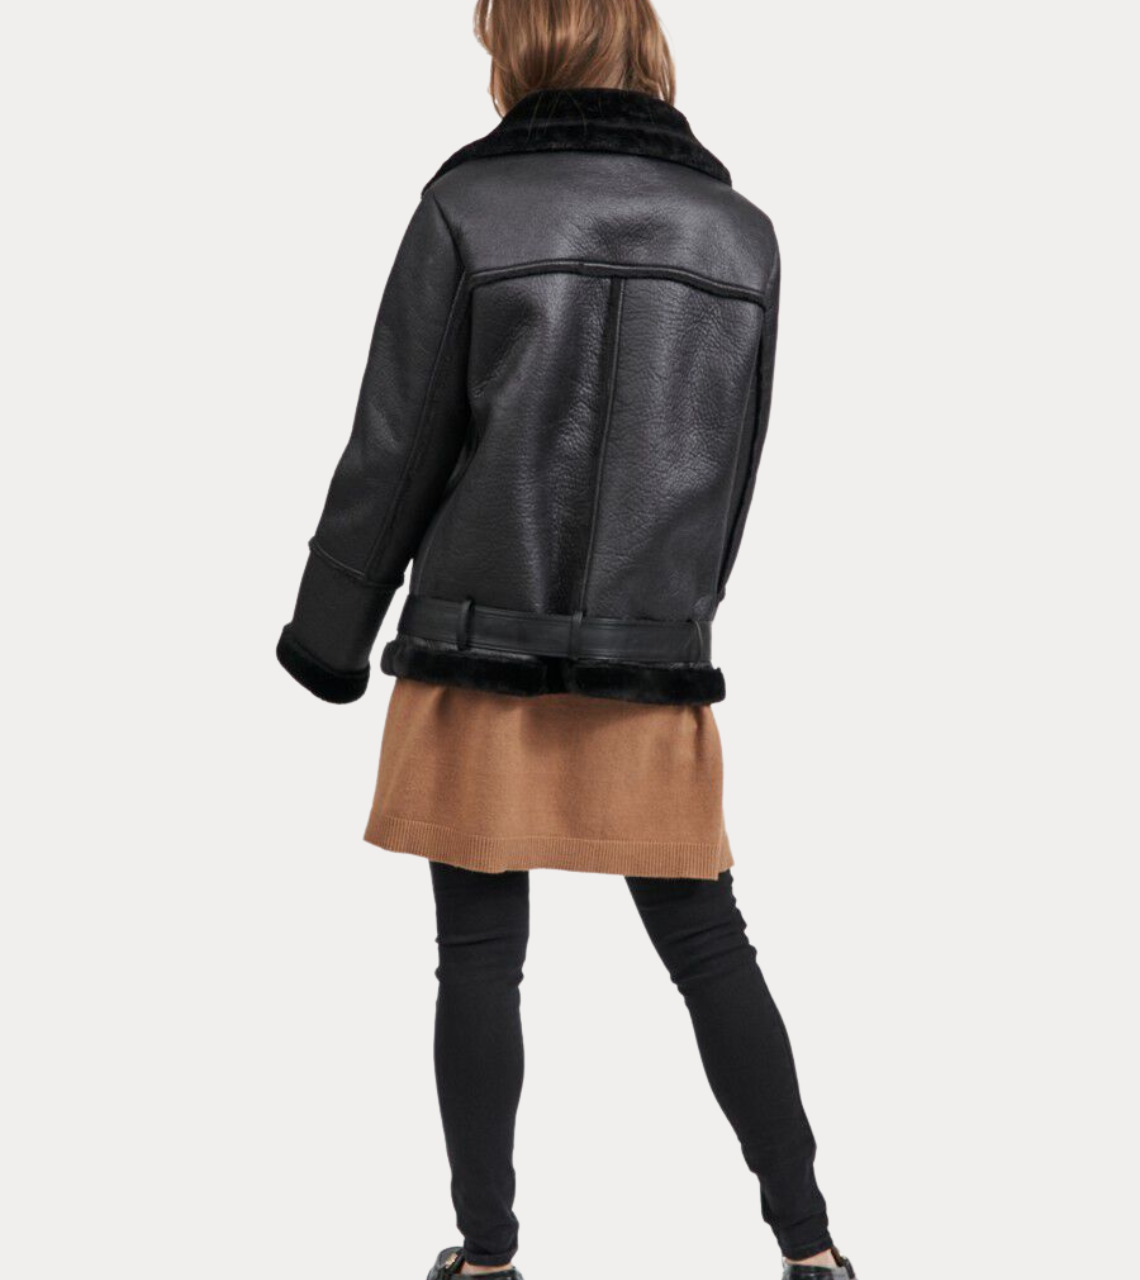 RAF Shearling Leather Jacket For Women's